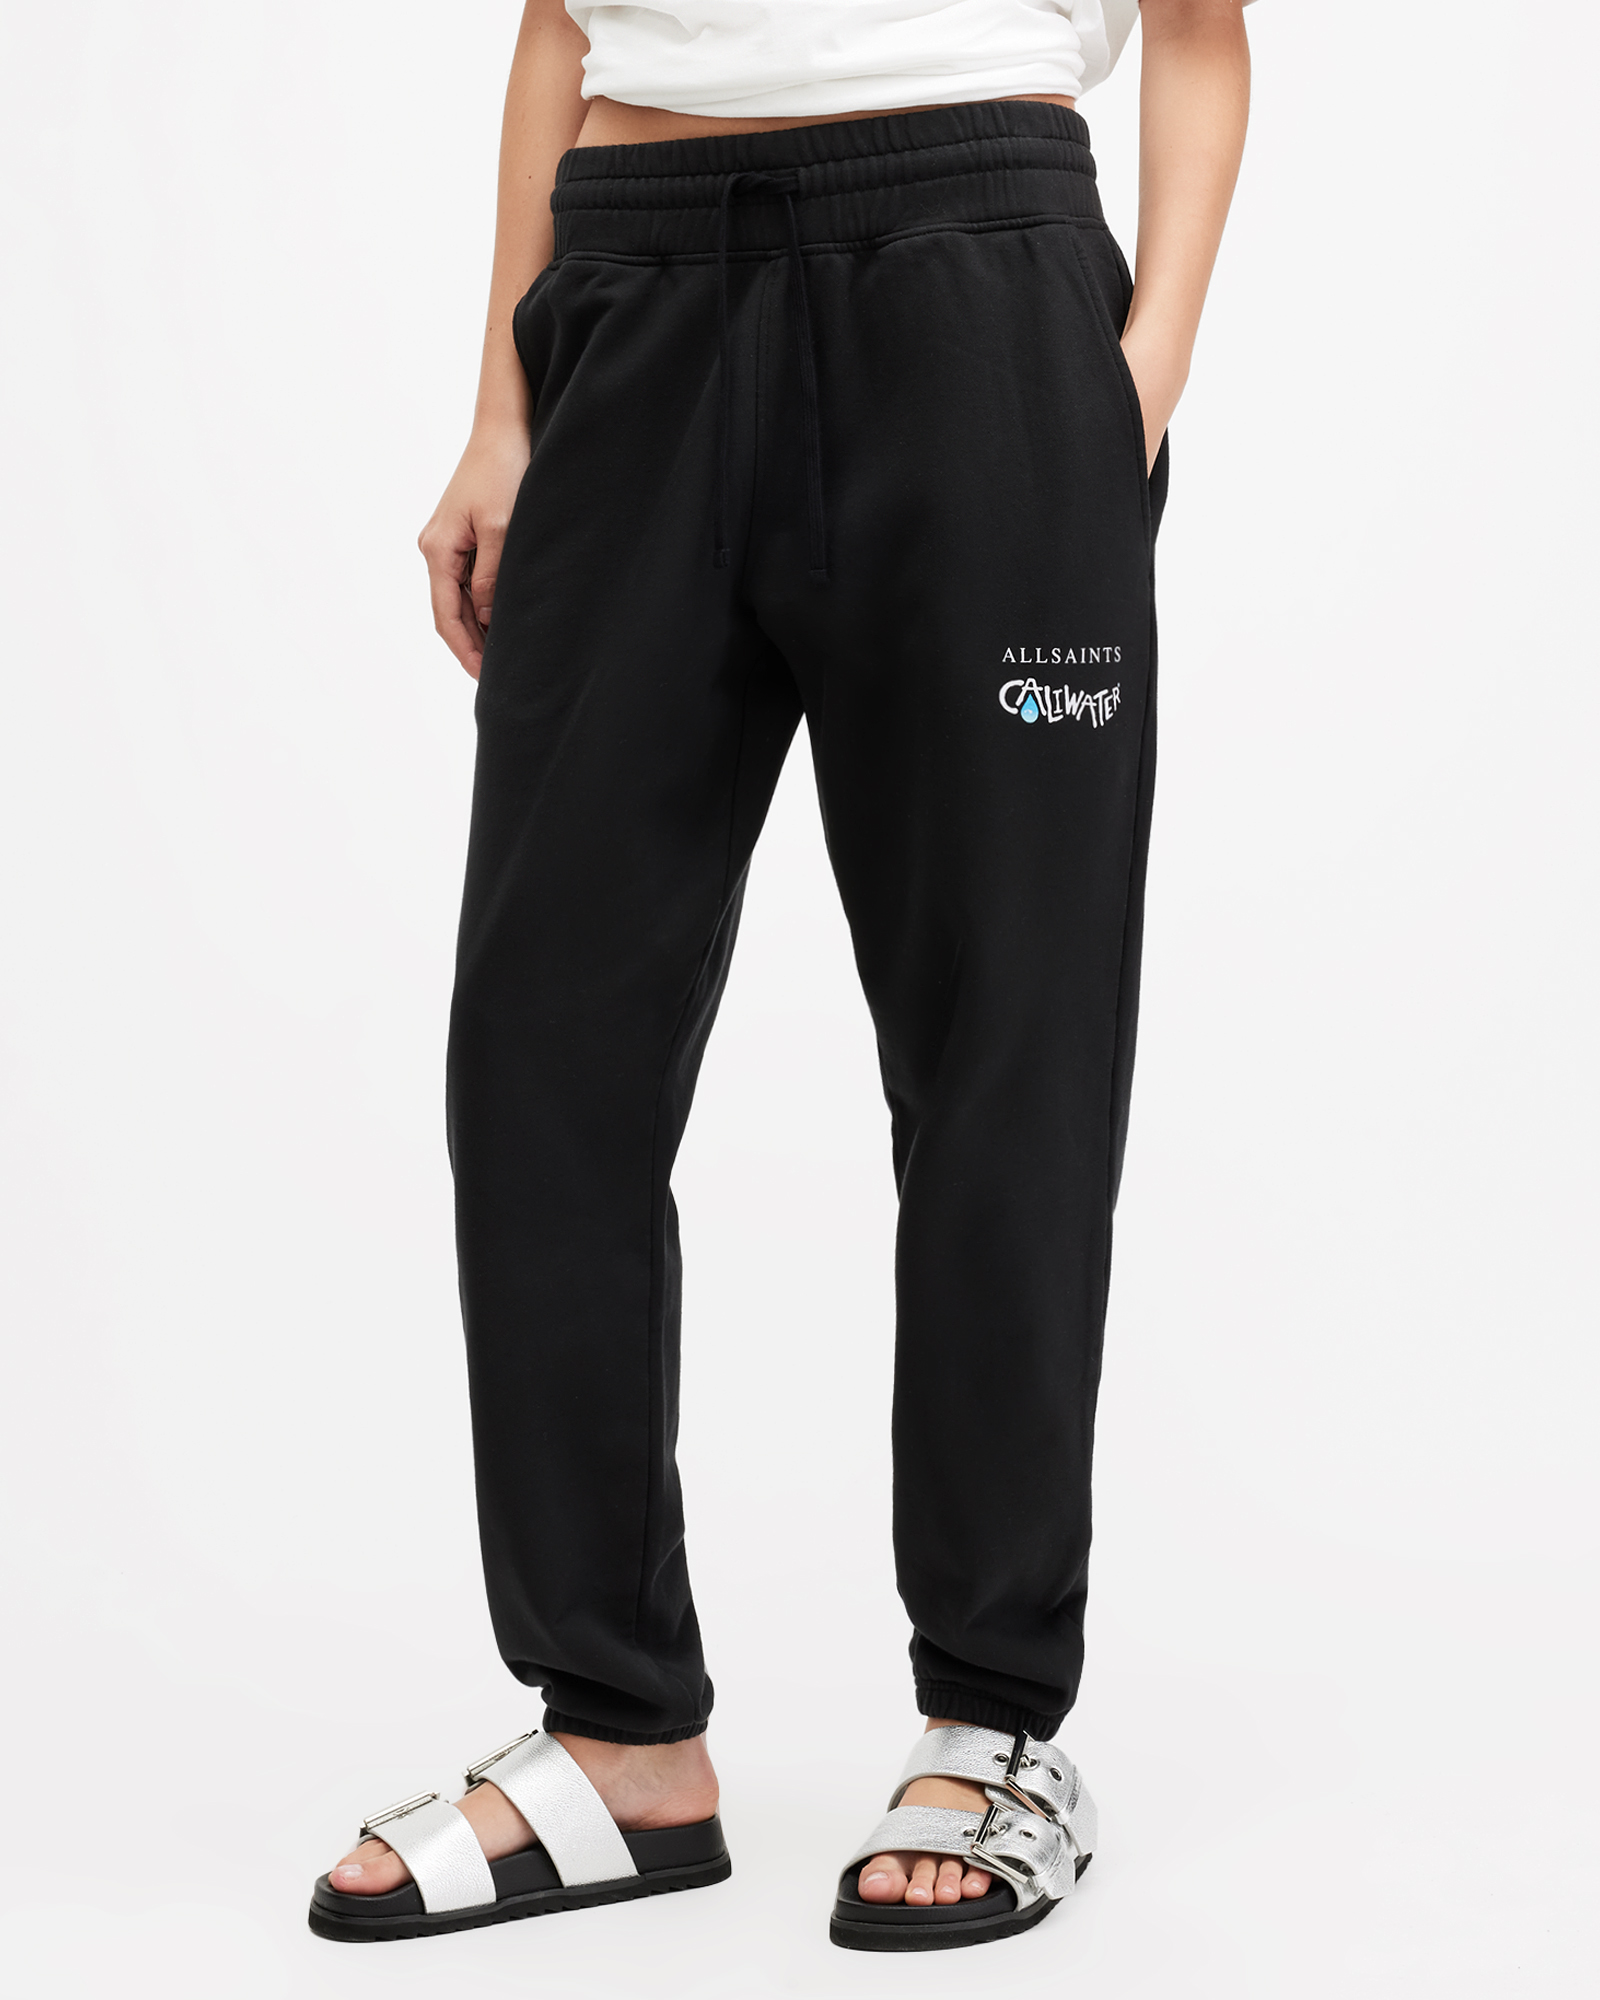 Shop Allsaints Caliwater Relaxed Fit Sweatpants In Jet Black